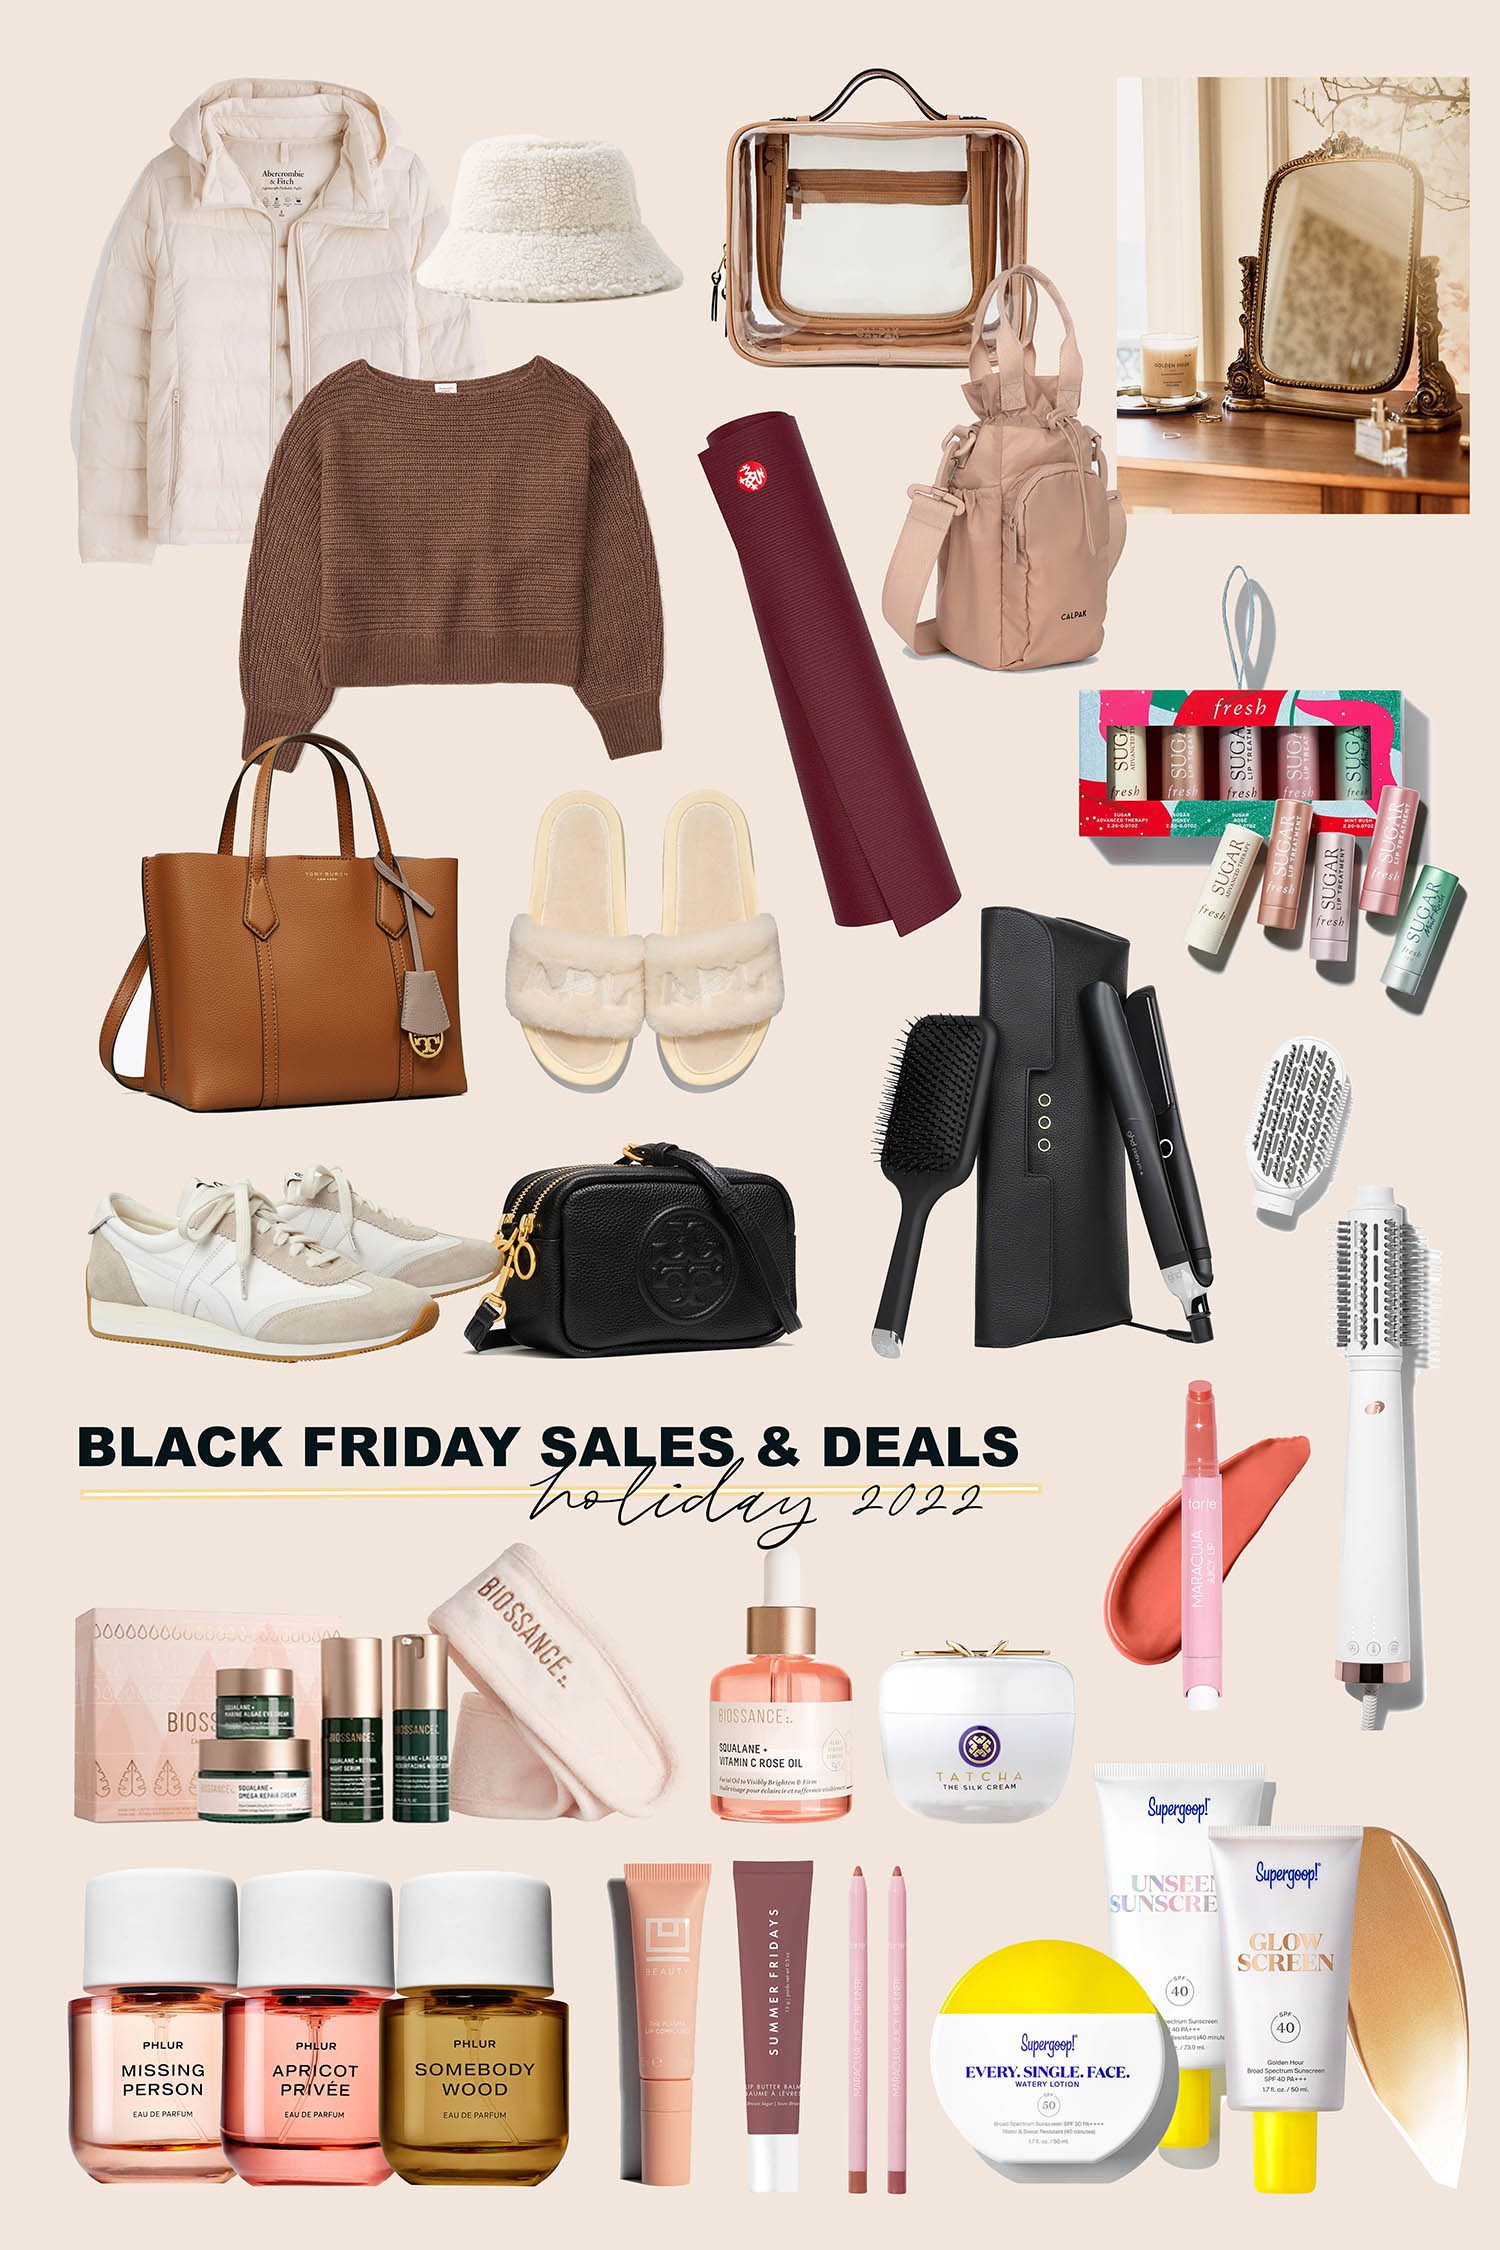 15 Early Black Friday Sale Items We're Adding to Our Bag